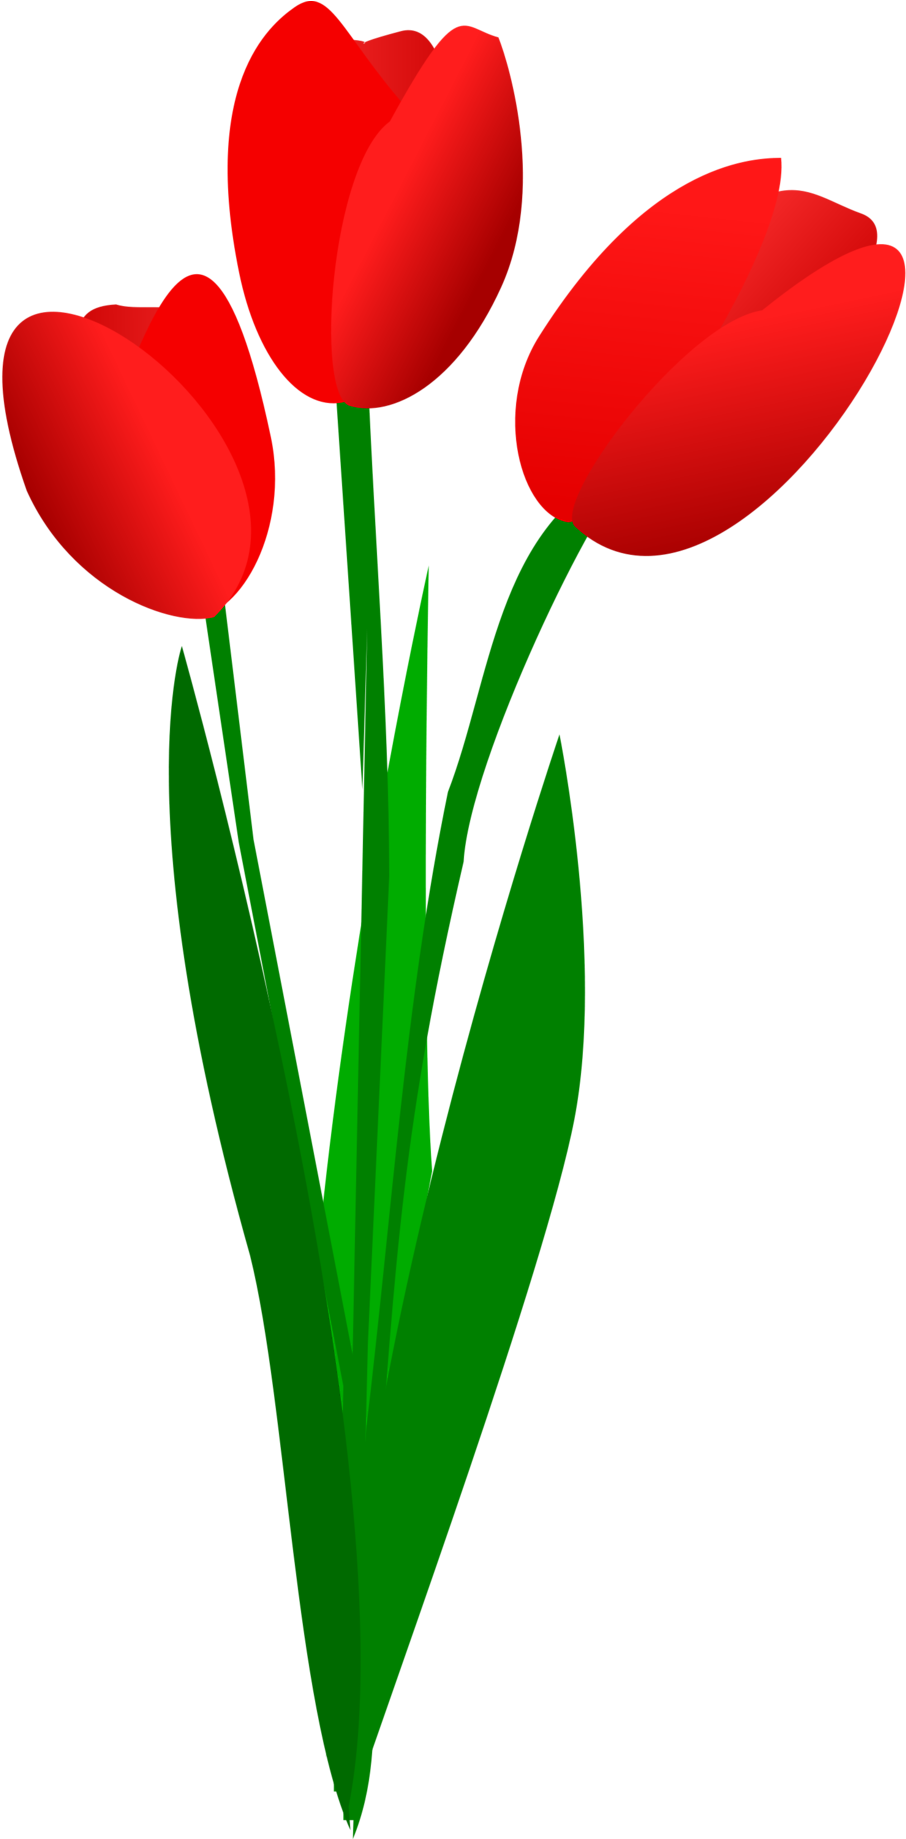 A Red Tulips With Green Stems